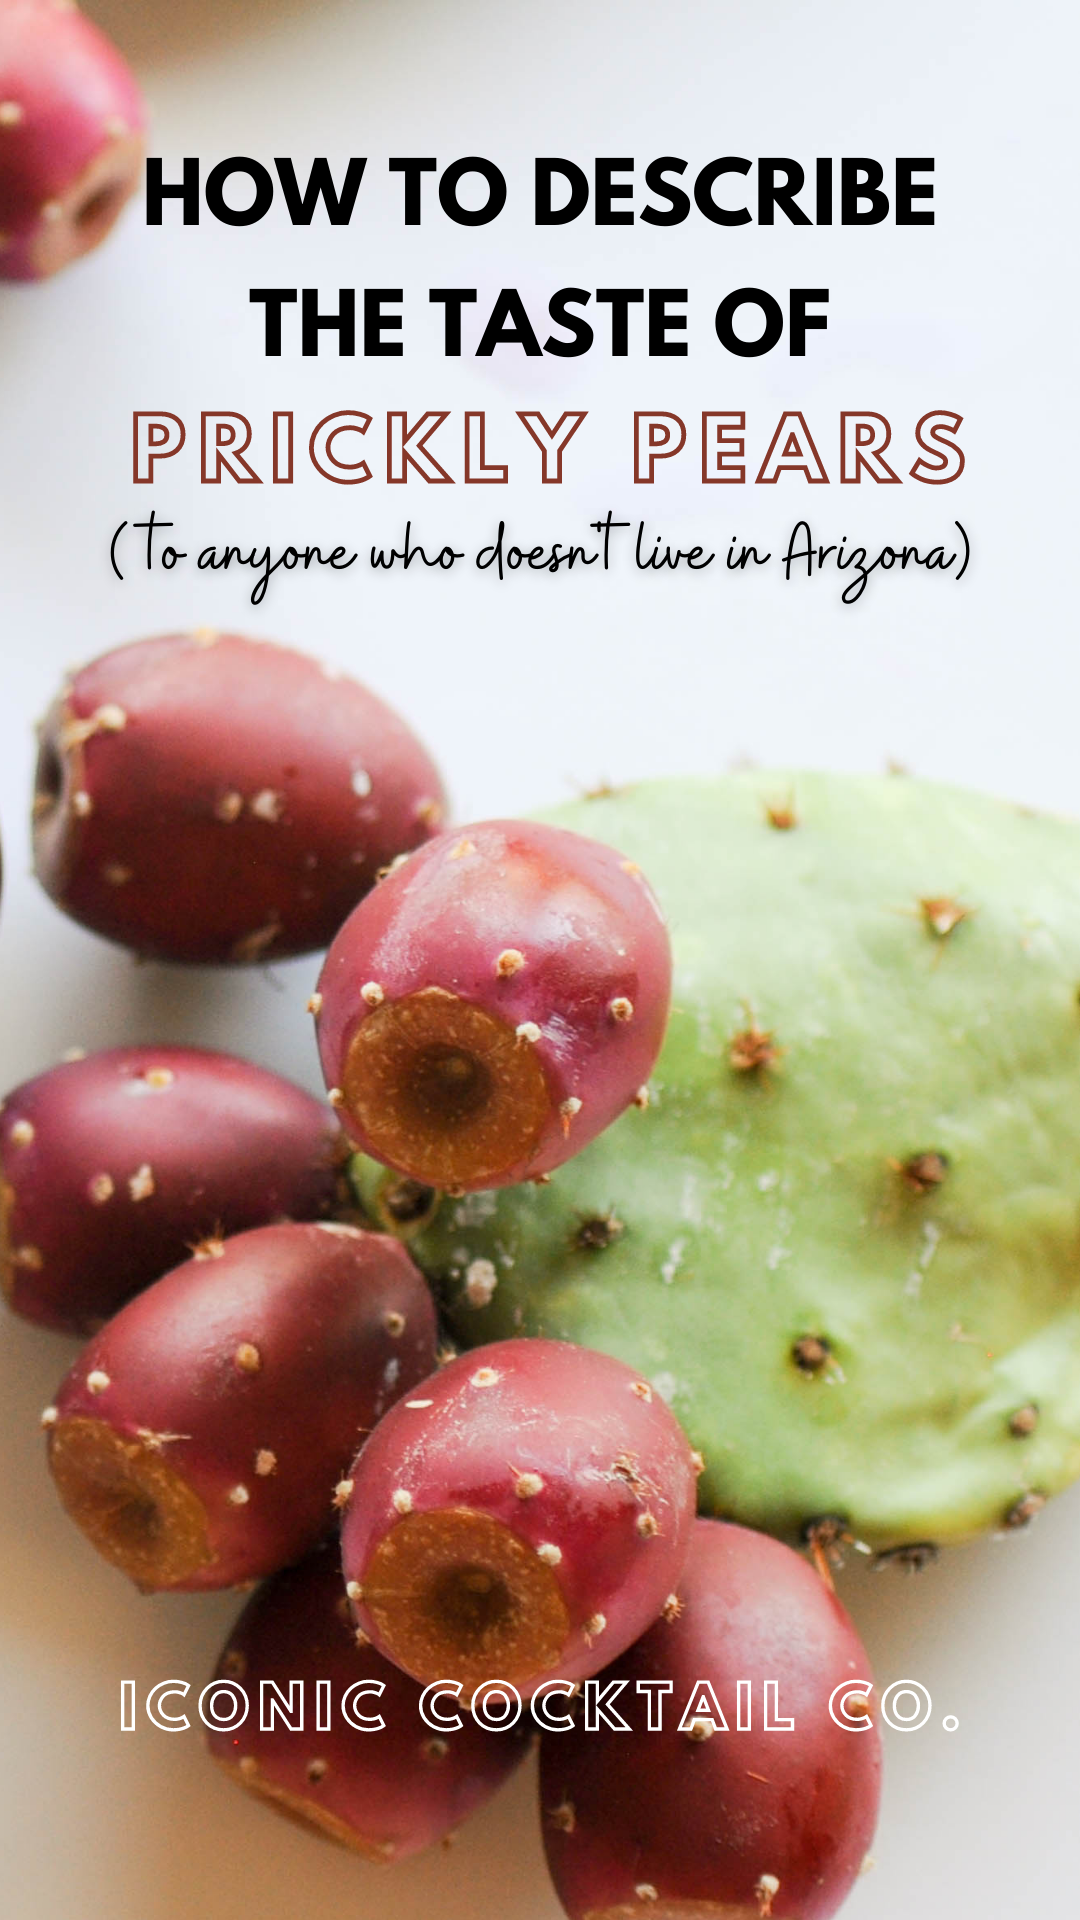 How to Describe the Taste of a Prickly Pear to Anyone Who Doesn’t Live in Arizona